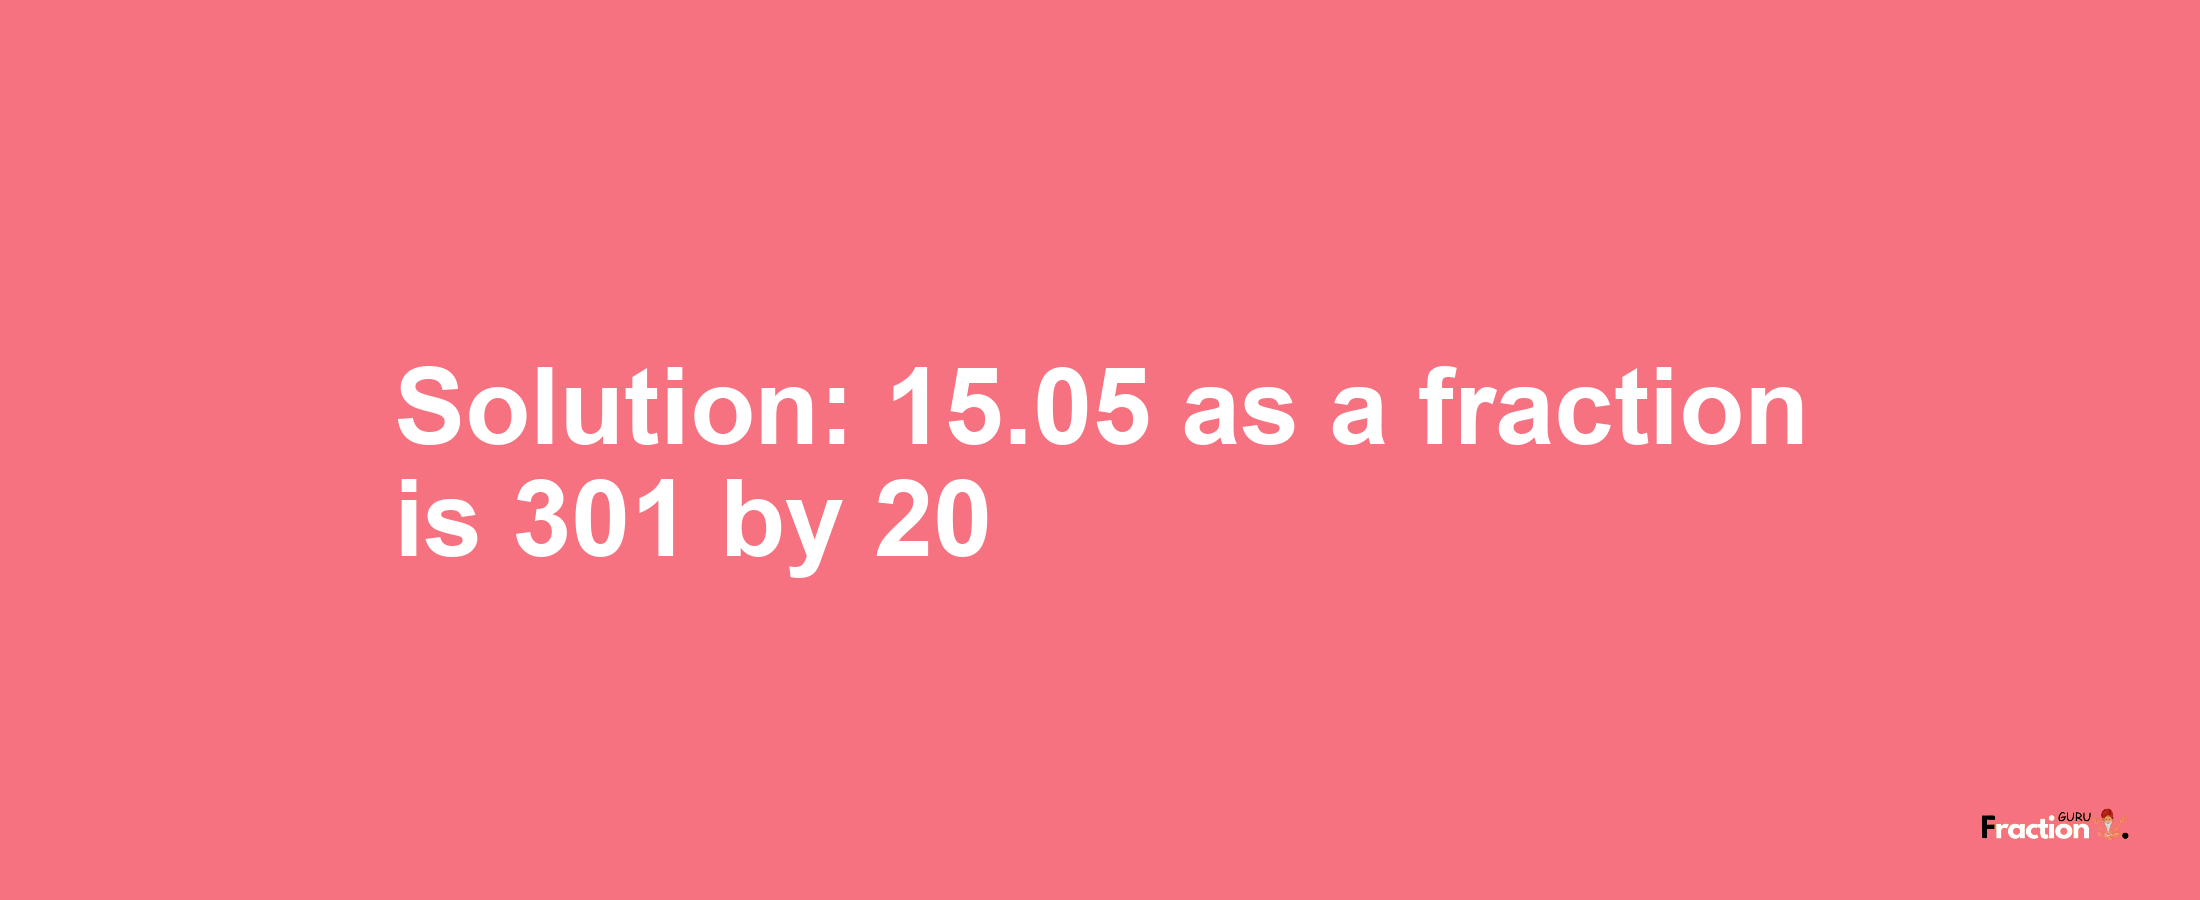 Solution:15.05 as a fraction is 301/20